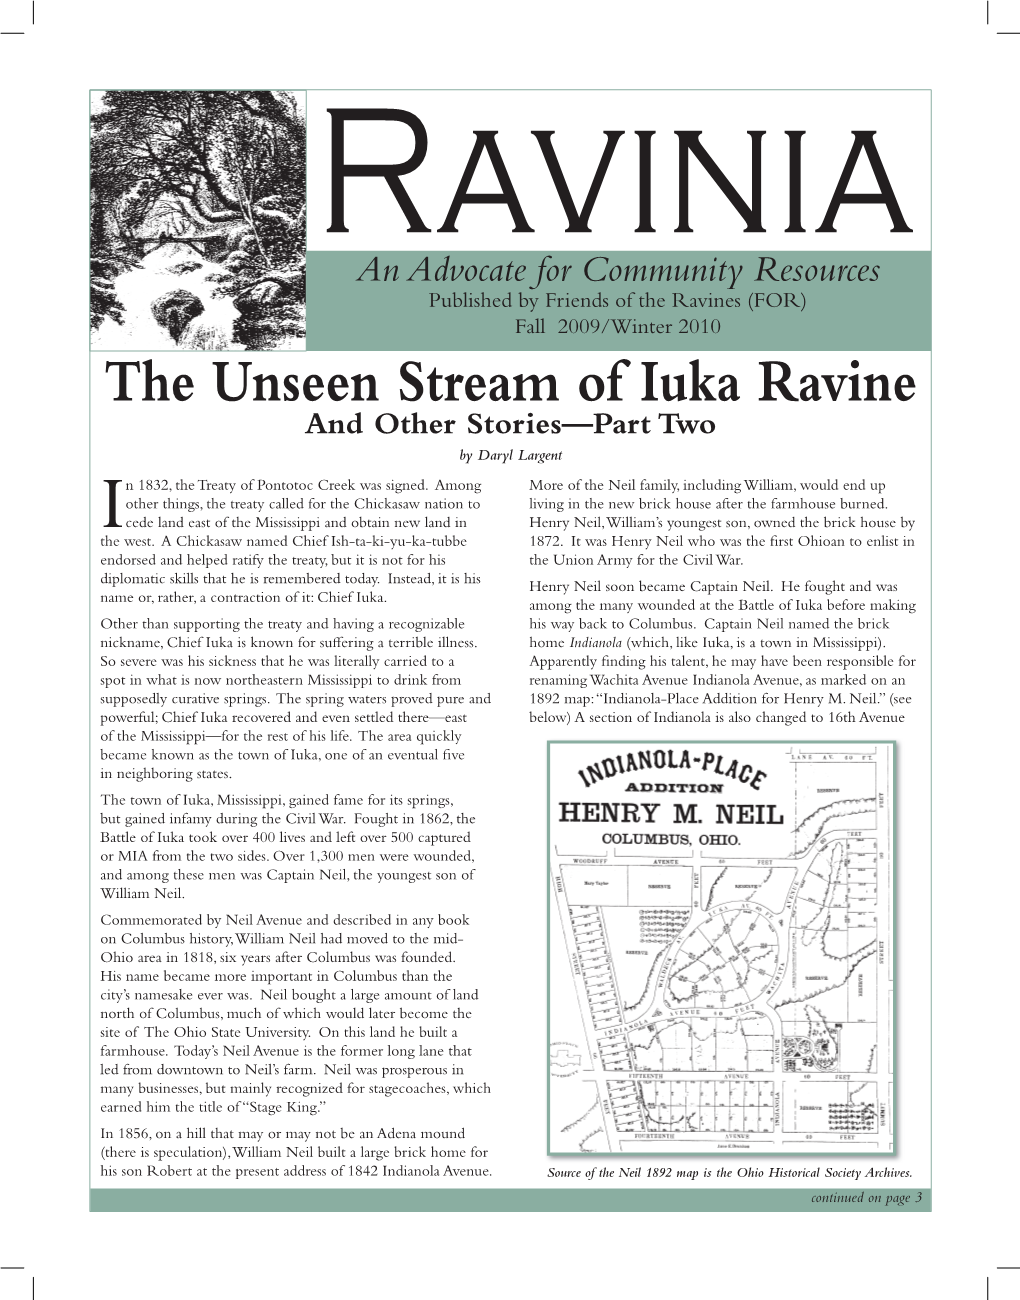 The Unseen Stream of Iuka Ravine and Other Stories—Part Two by Daryl Largent N 1832, the Treaty of Pontotoc Creek Was Signed